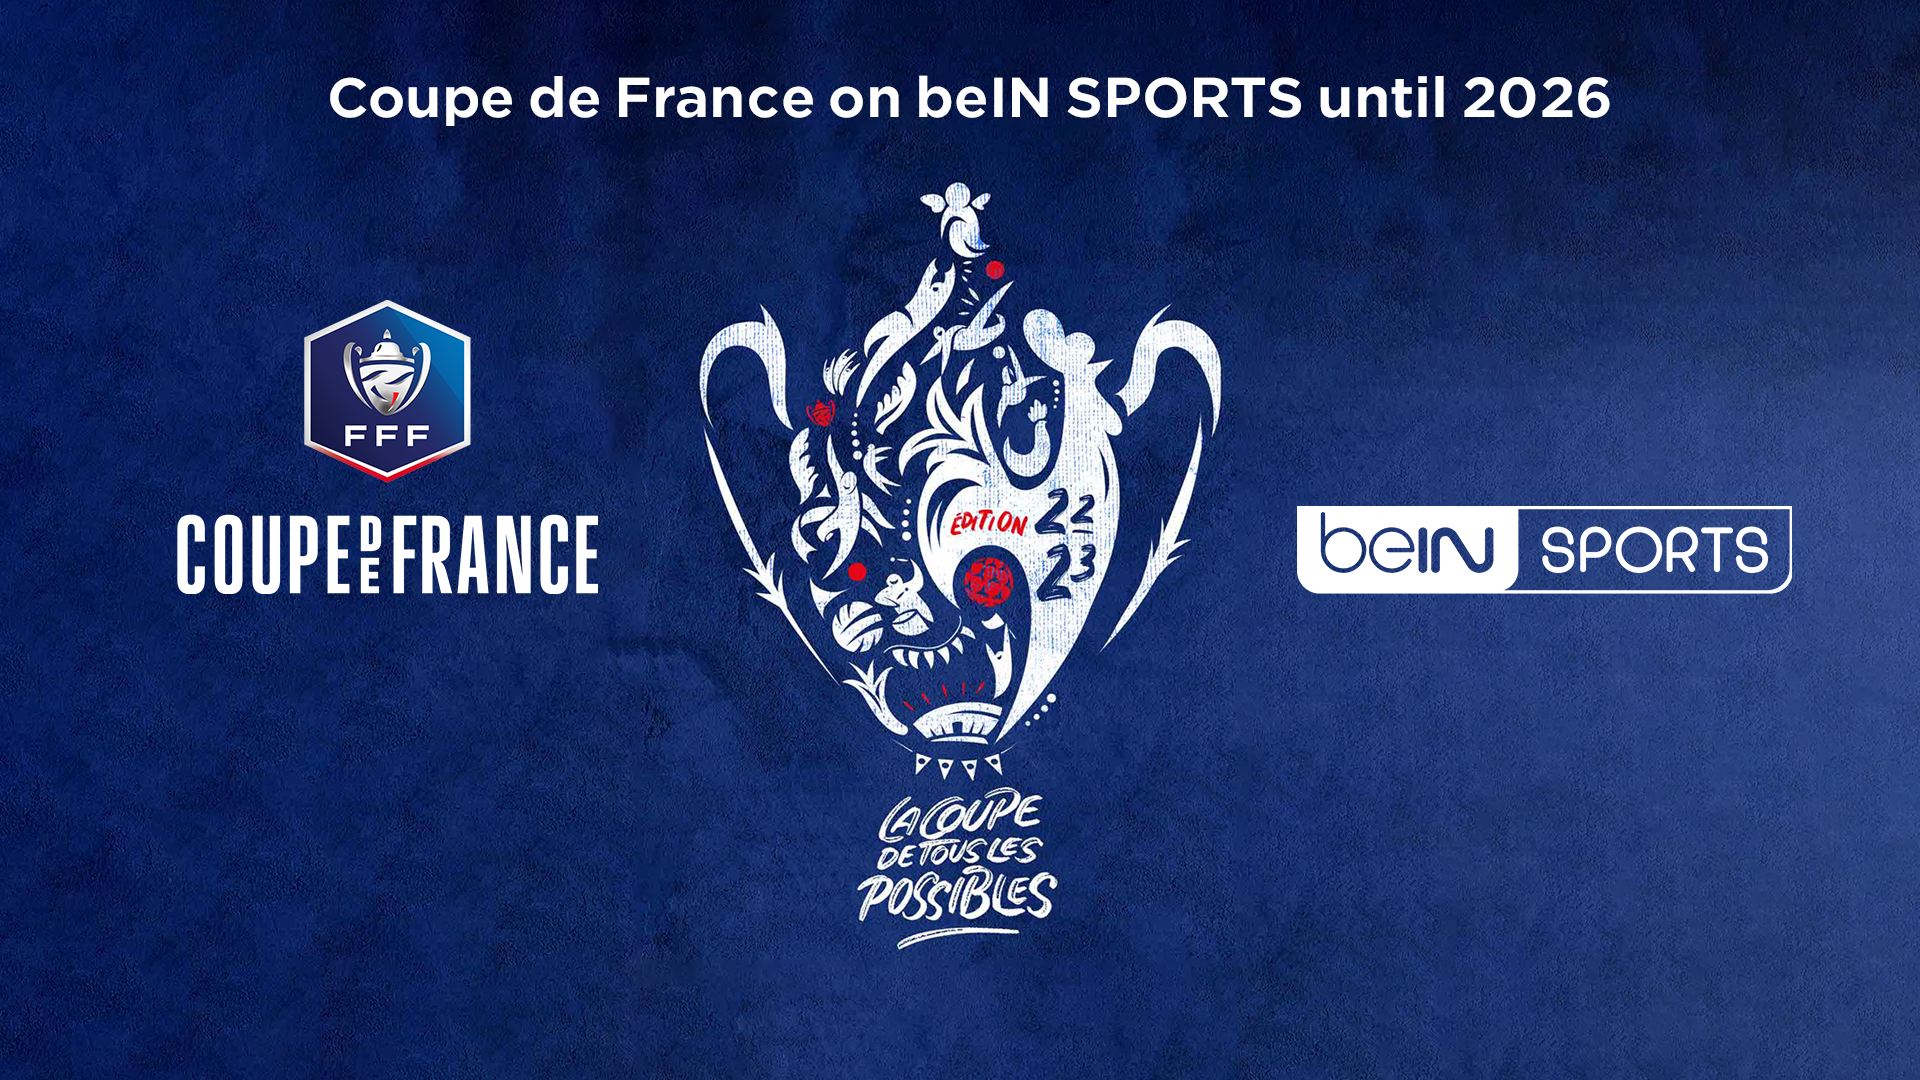 beIN SPORTS TO BROADCAST COUPE DE FRANCE IN A DEAL UNTIL 2026